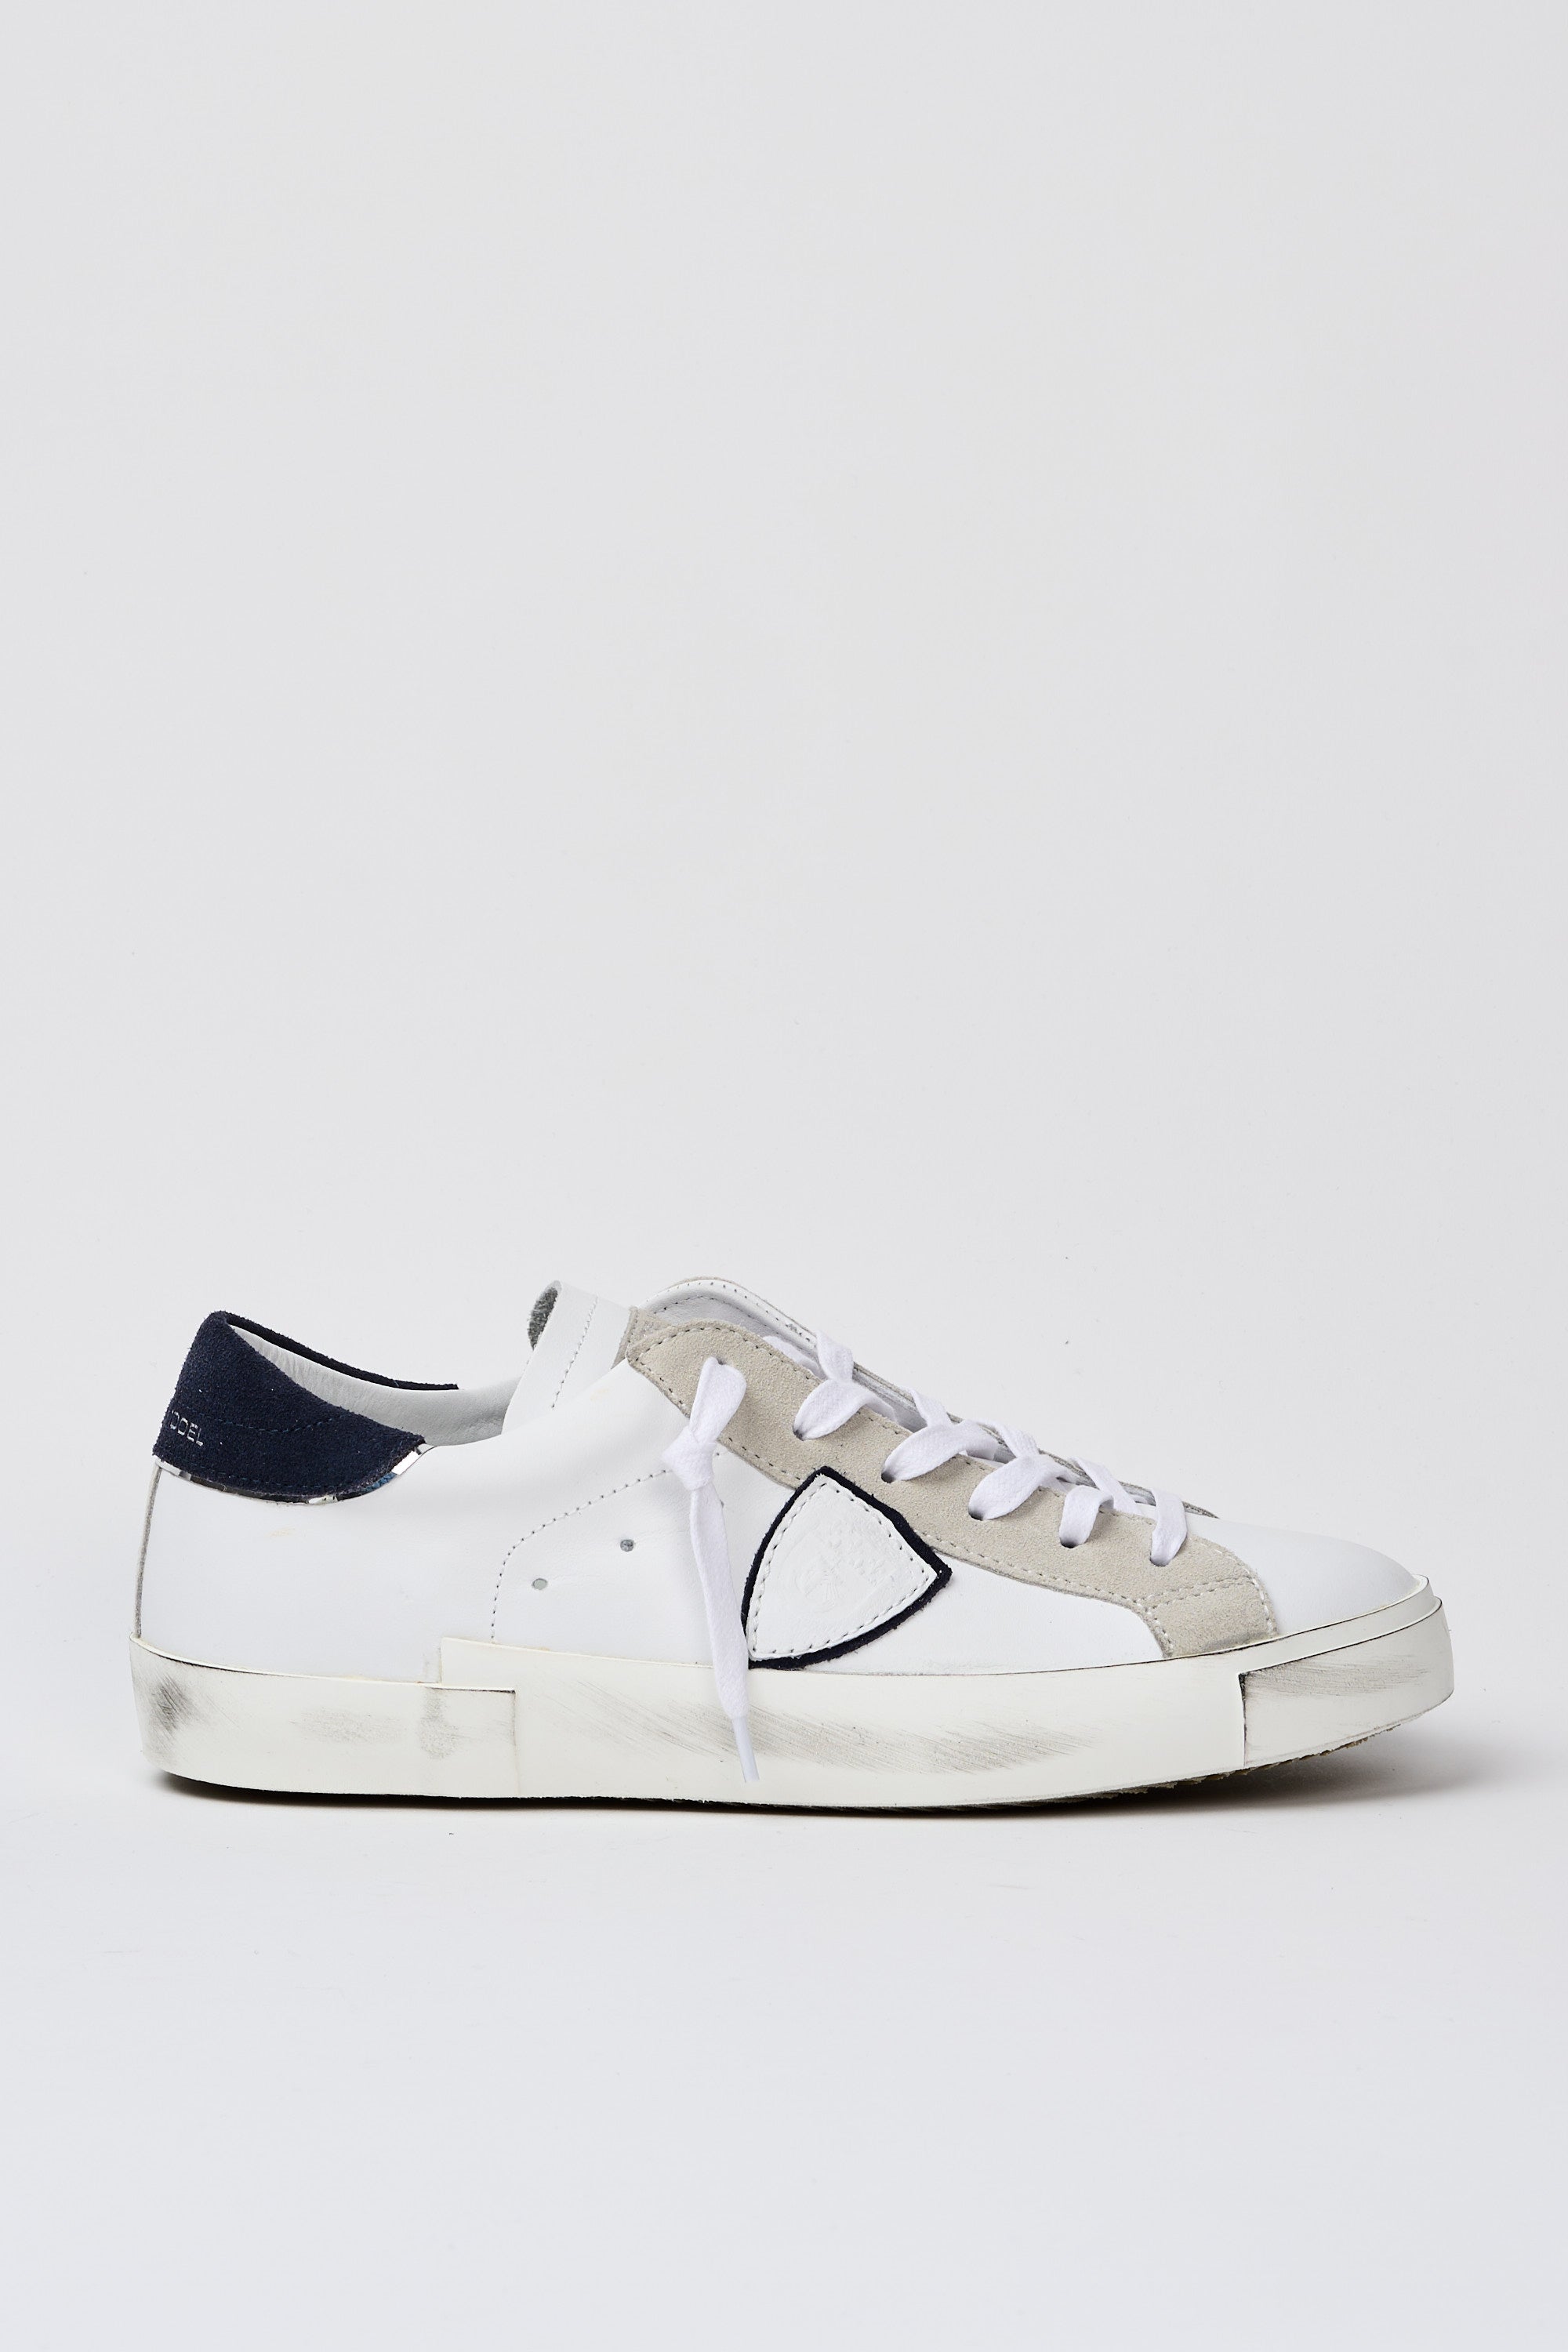 Philippe Model Sneaker PRSX Leather/Suede White/Blue-1